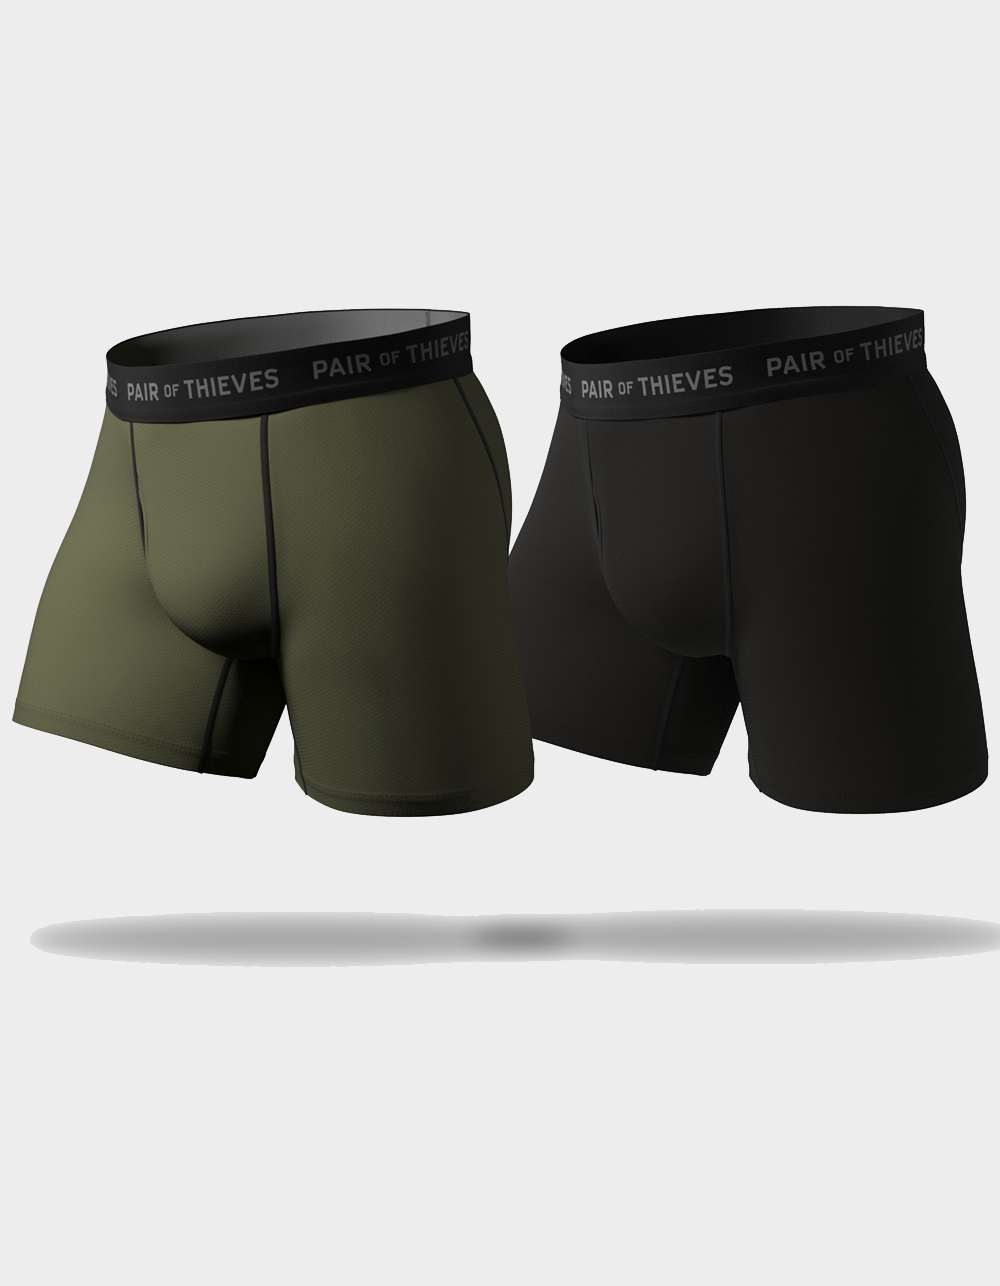 PAIR OF THIEVES 2 Pack Mens Superfit Boxer Briefs - BLACK COMBO